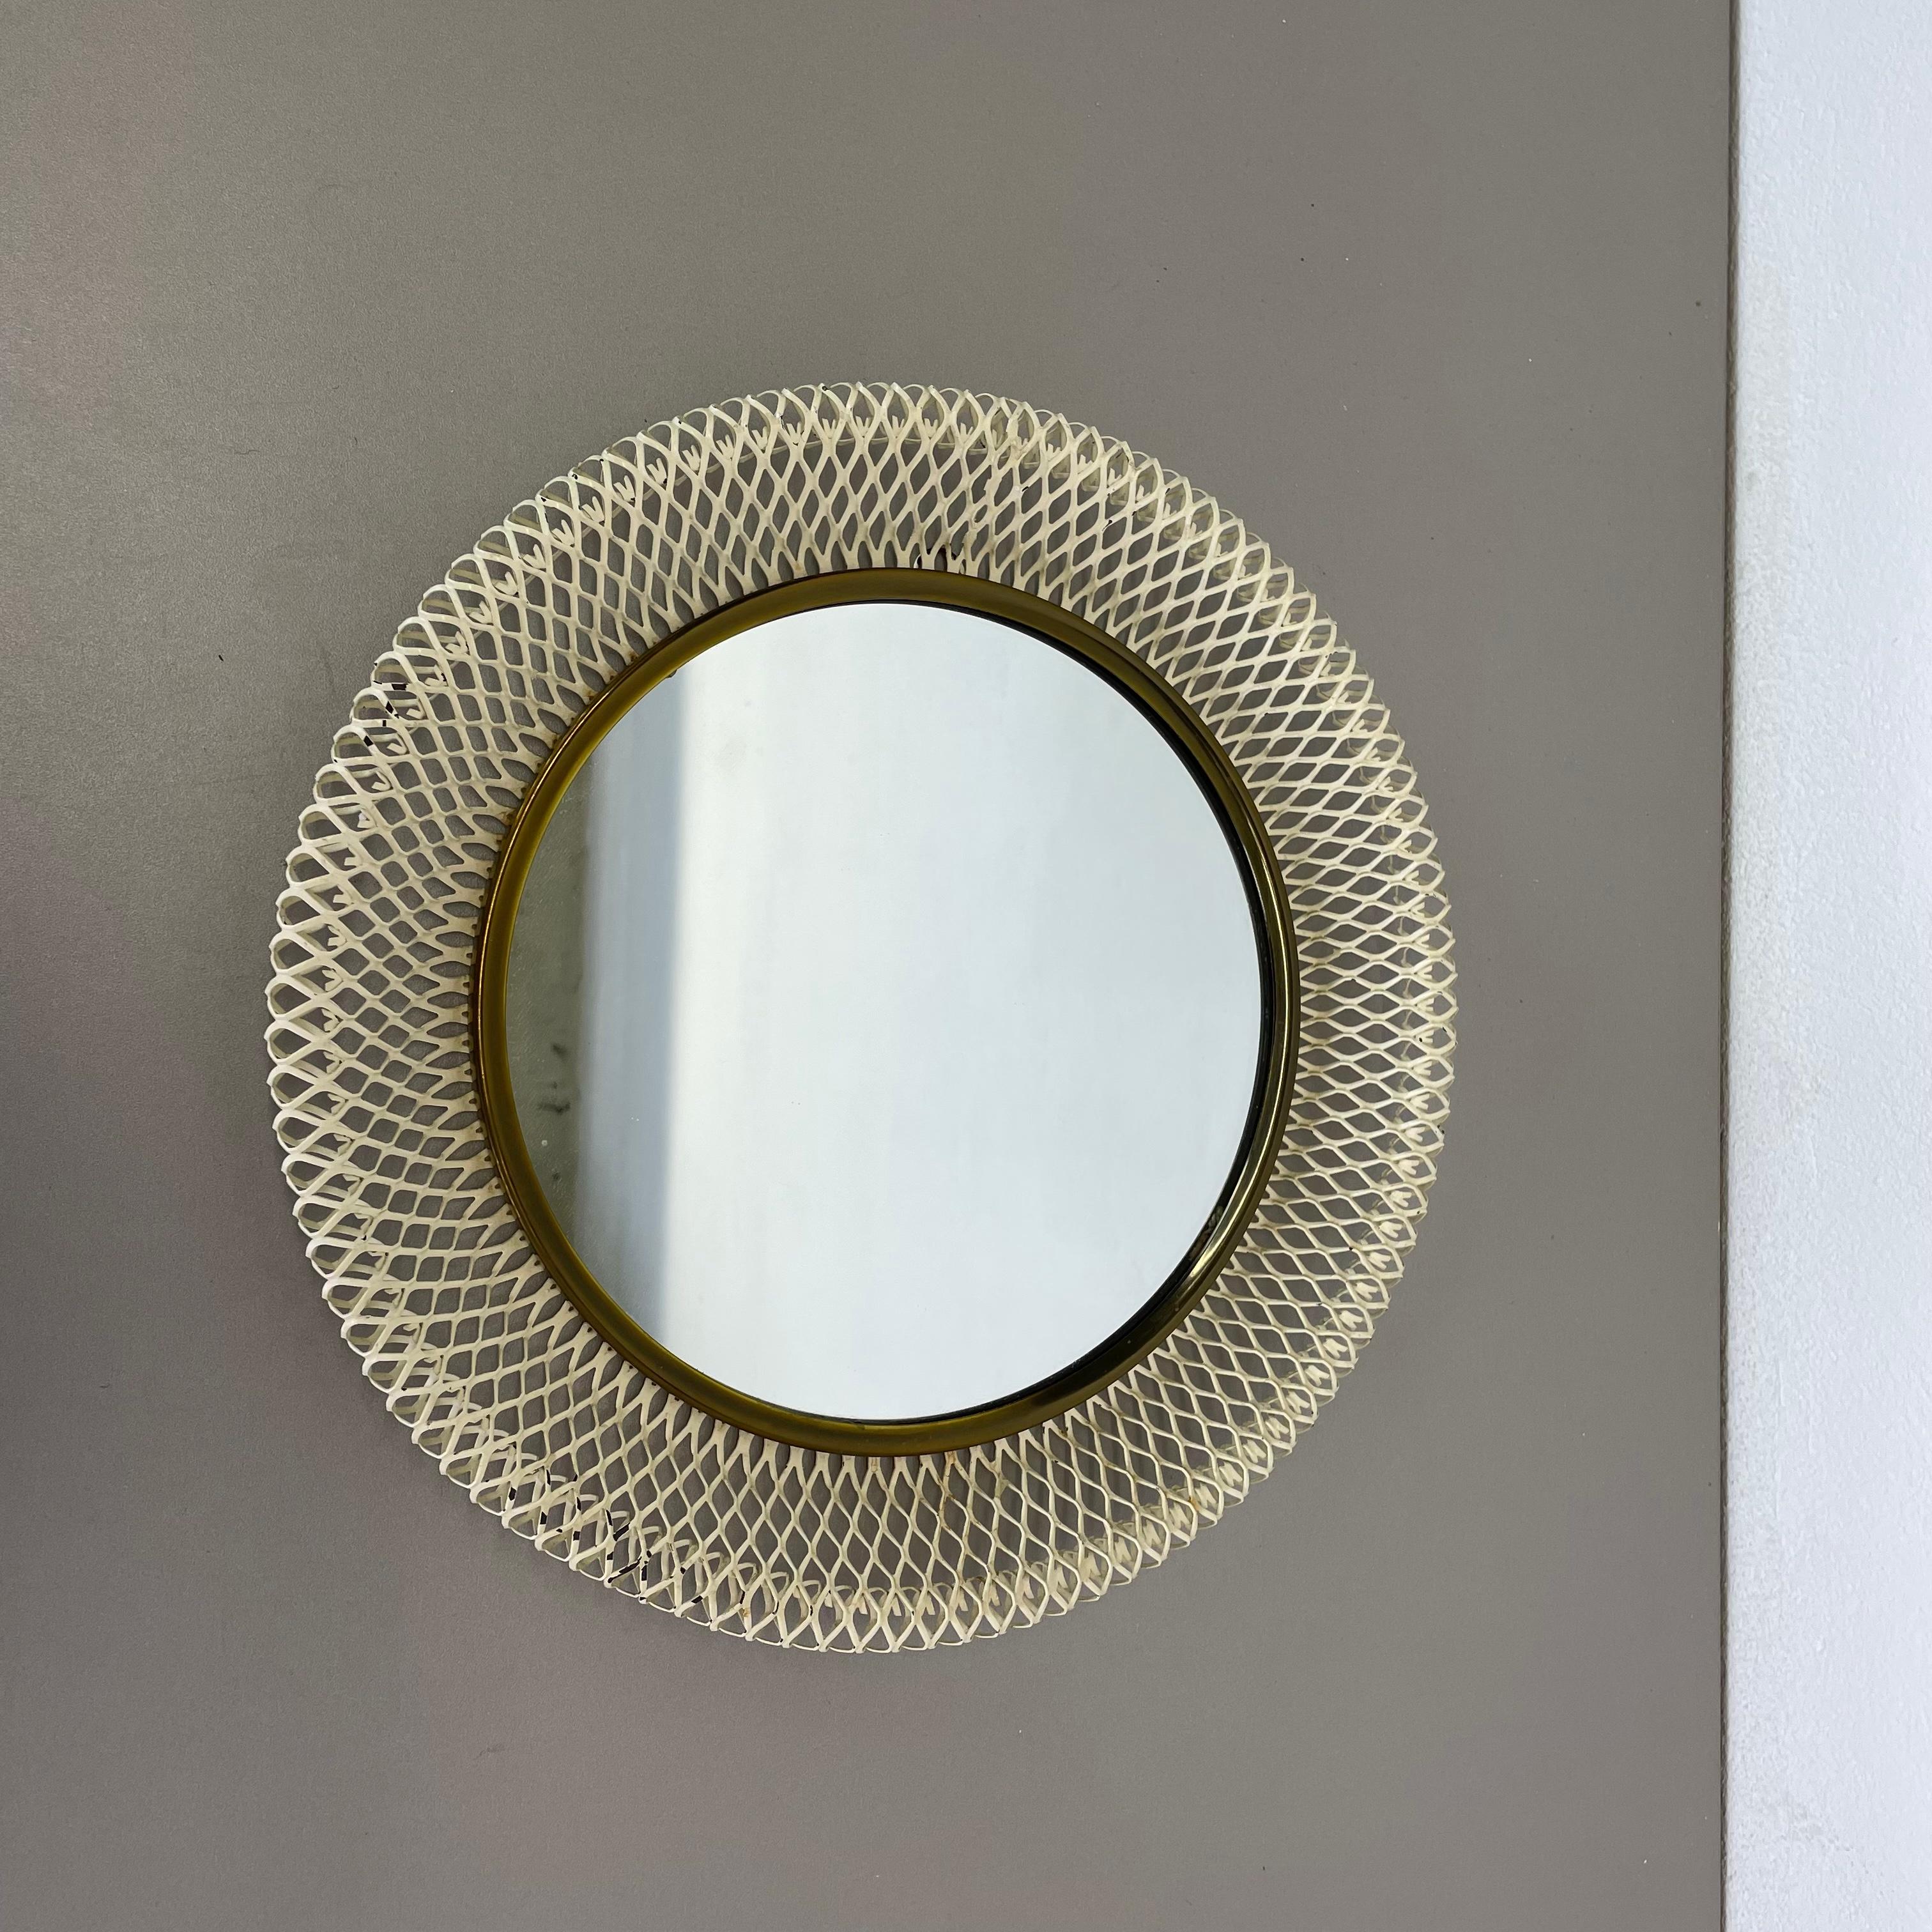 Original 1950s French Mategot Style Bauhaus Metal Wall Mirror, France 1950s In Good Condition For Sale In Kirchlengern, DE